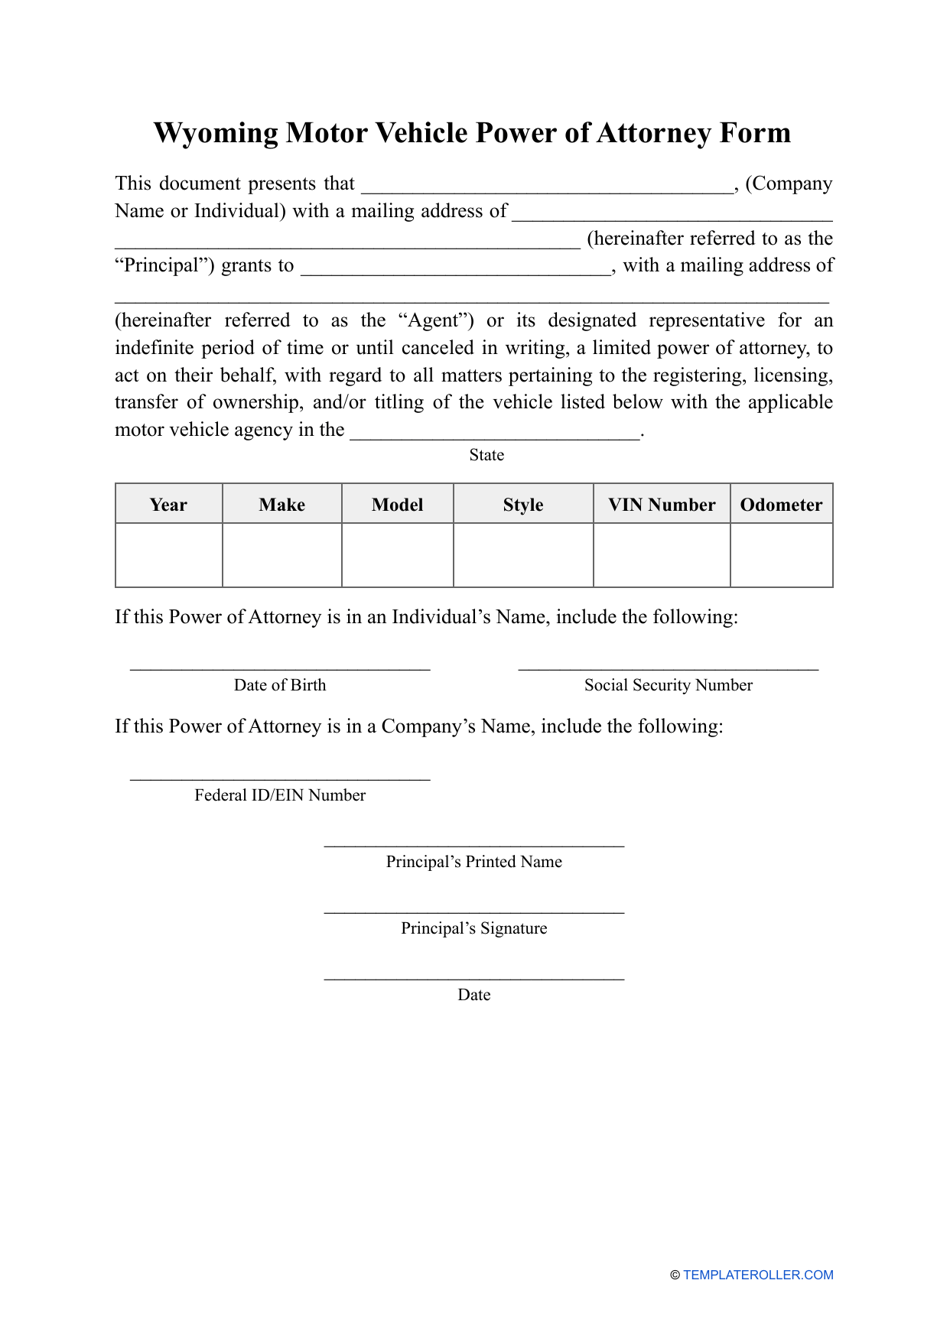 Motor Vehicle Power of Attorney Form - Wyoming, Page 1